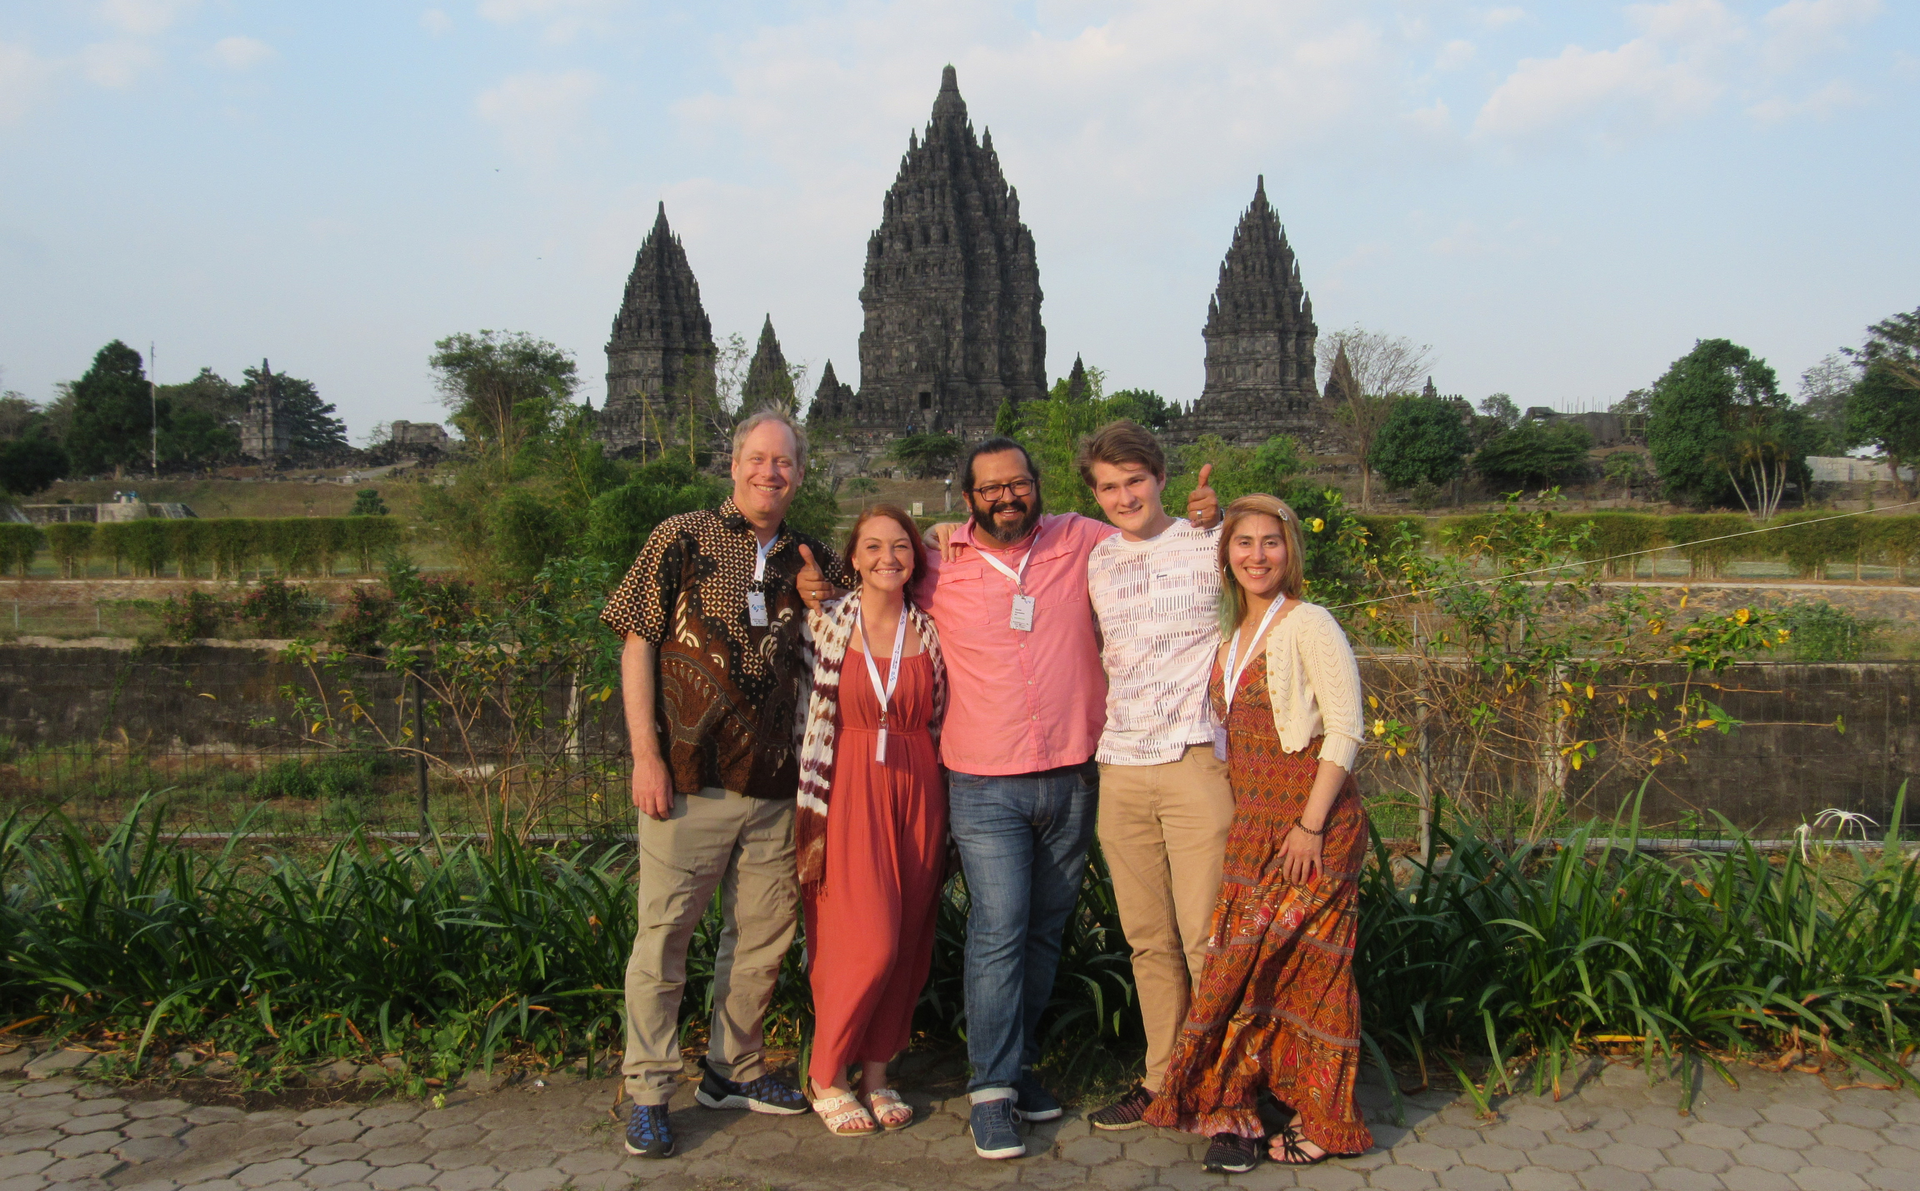 Professor and four students pose in front of ancient Hindu temple in Indonesia